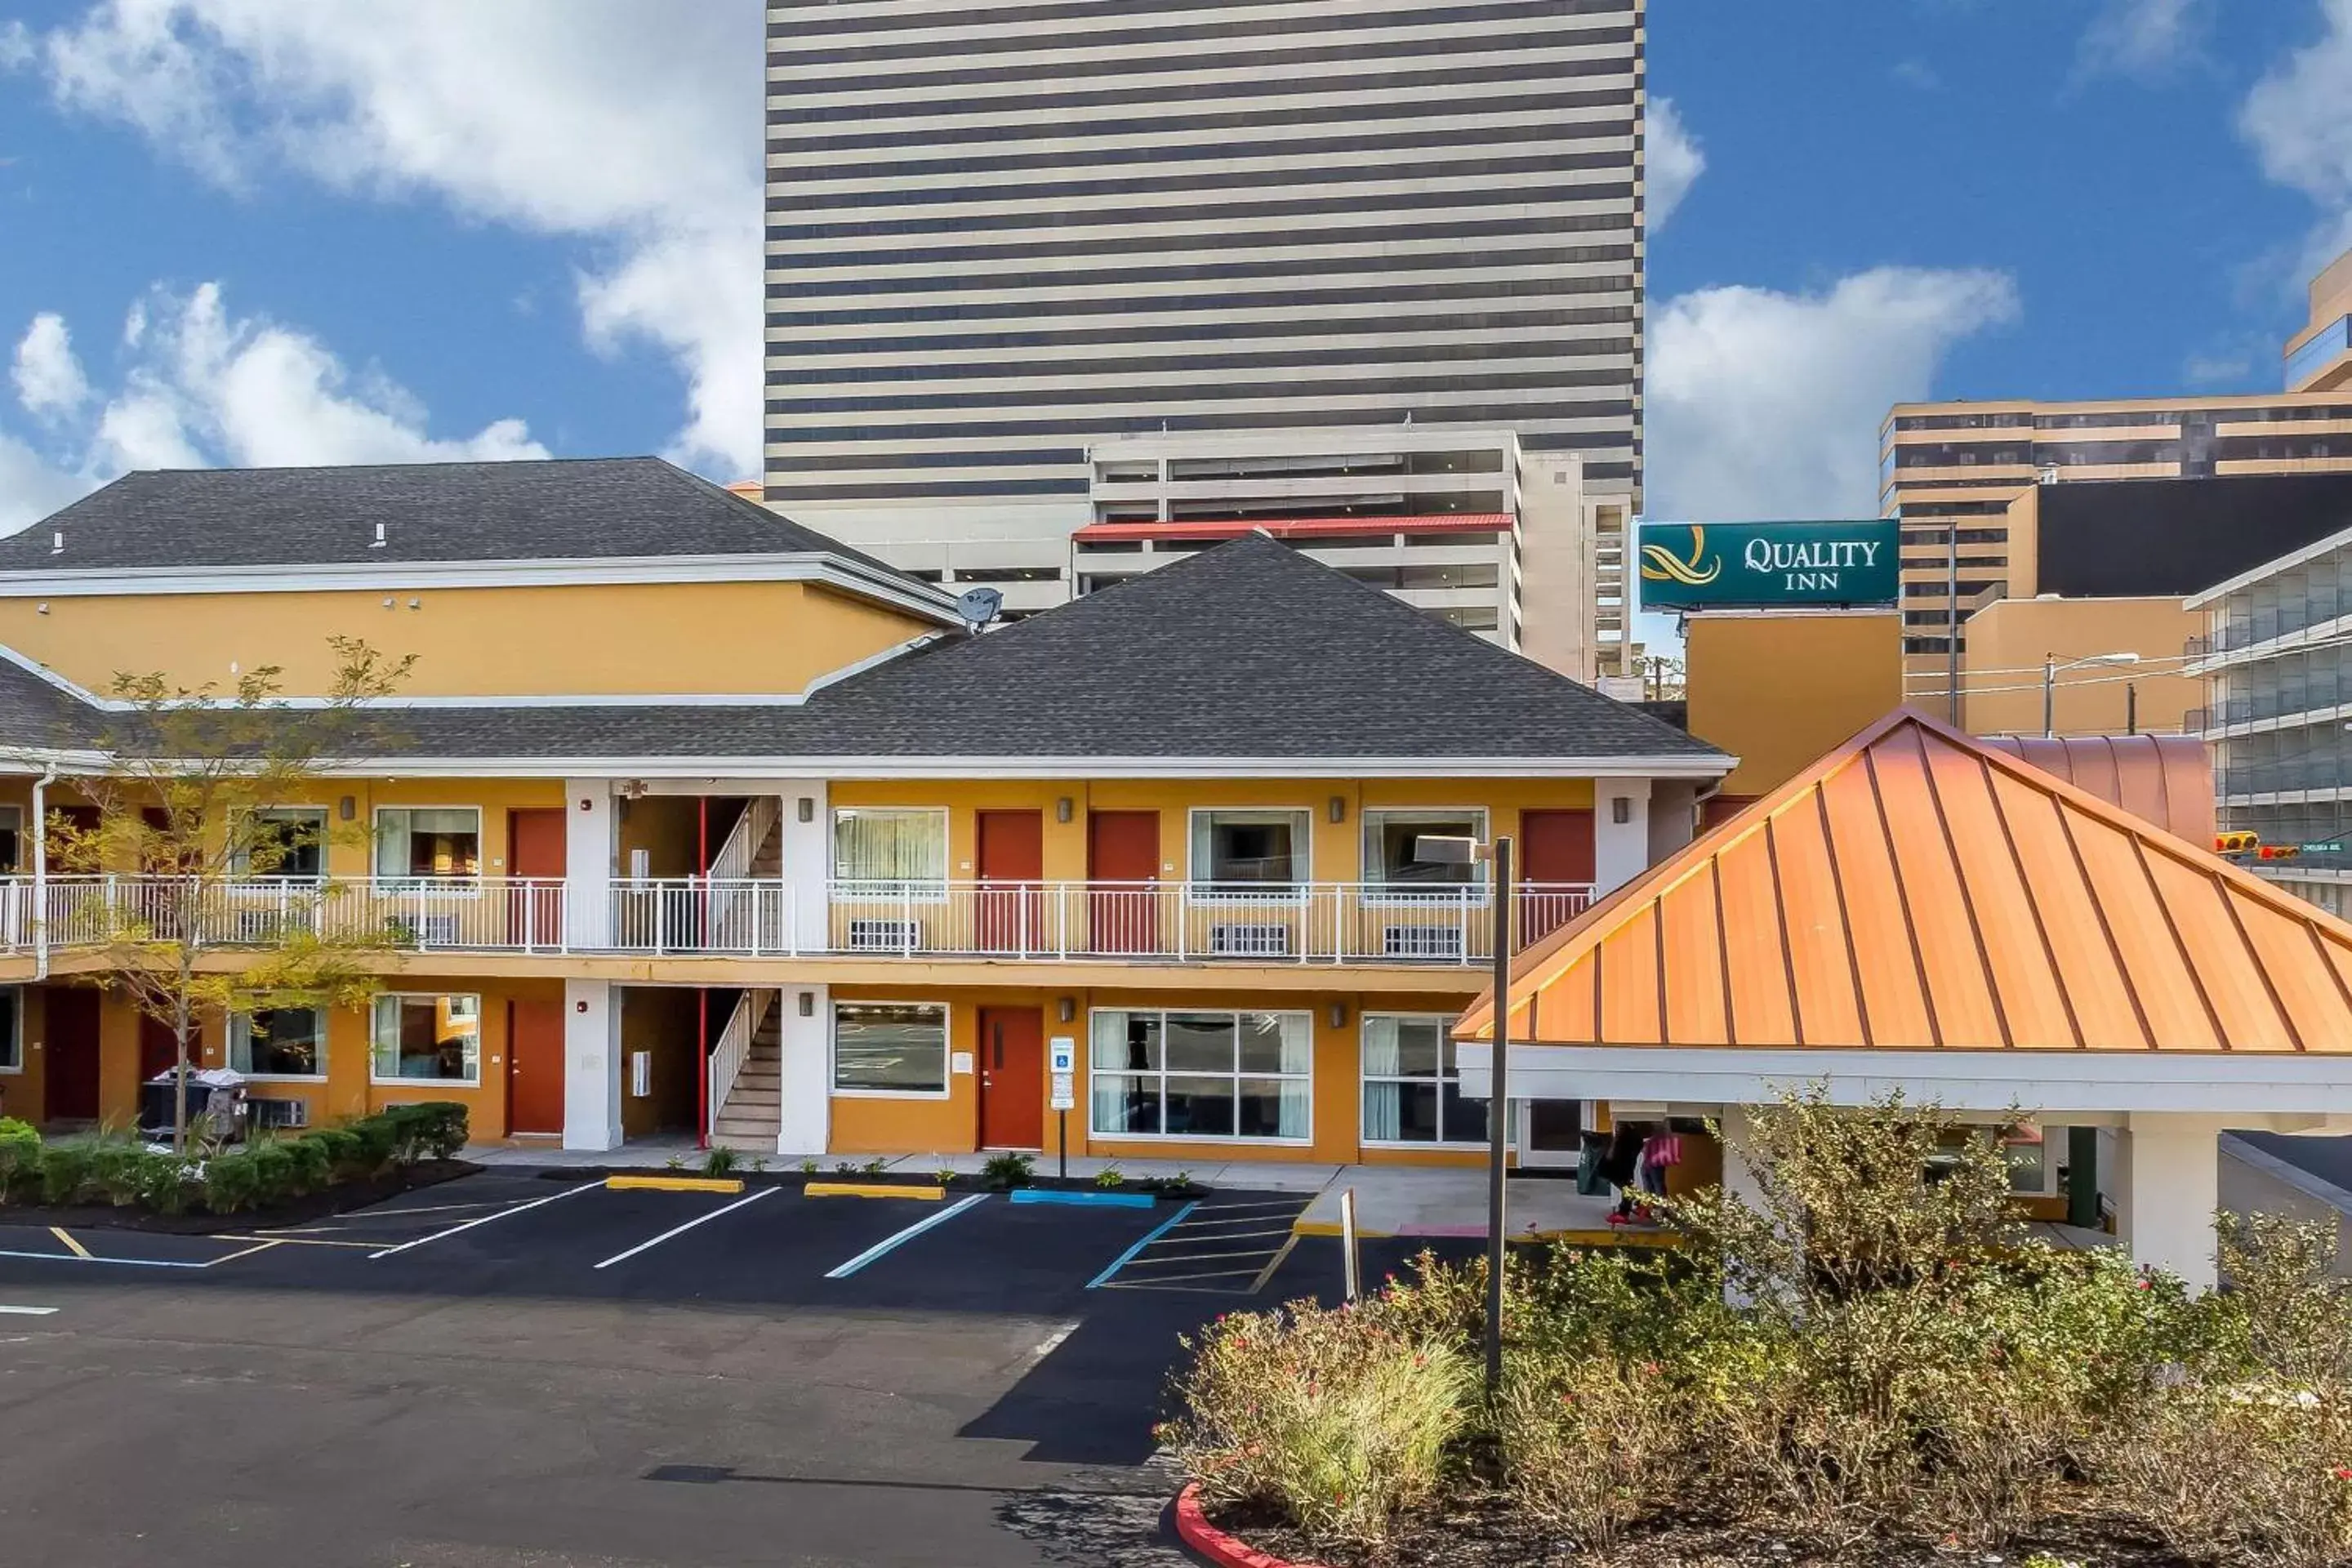 Property Building in Quality Inn Flamingo